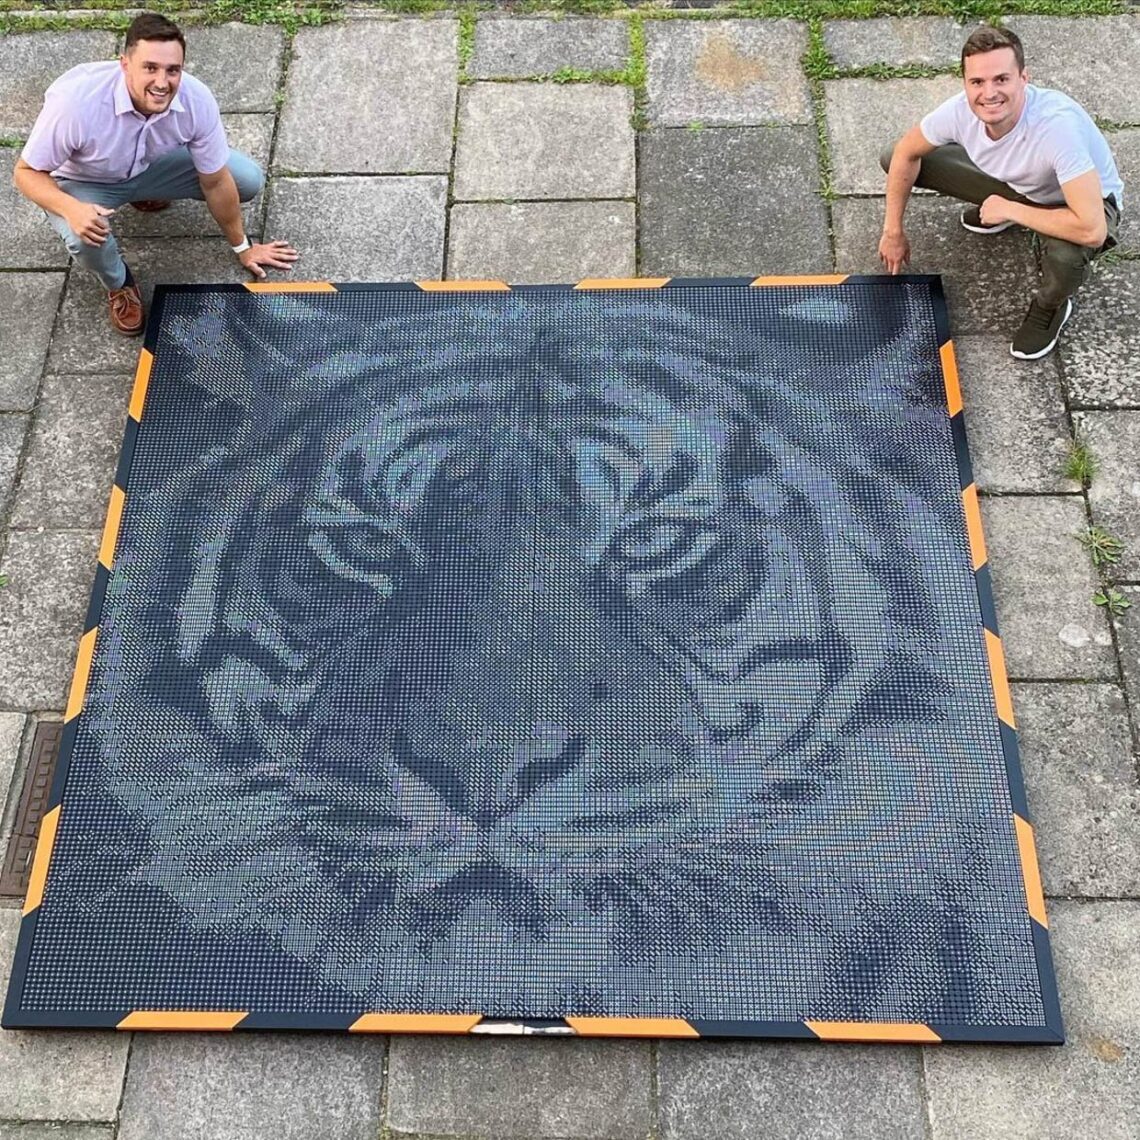 Two men proudly presenting a large tiger portrait made of dominoes on an outdoor patio.